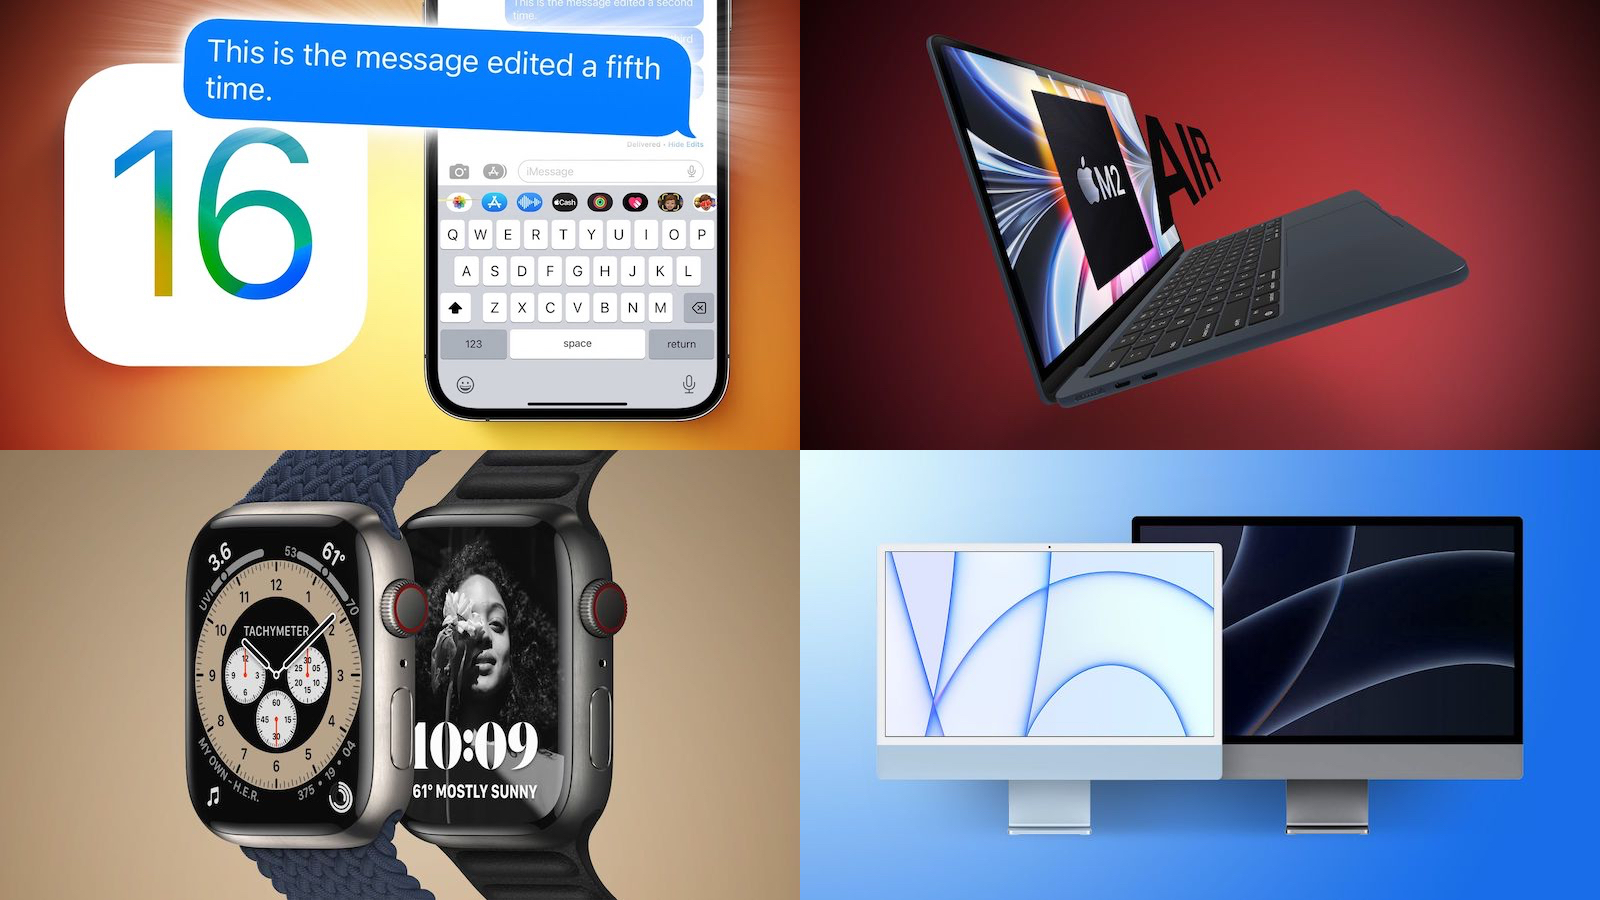 Top Stories: iOS 16 Beta 4, ‘Apple Watch Pro’ Rumors, and More